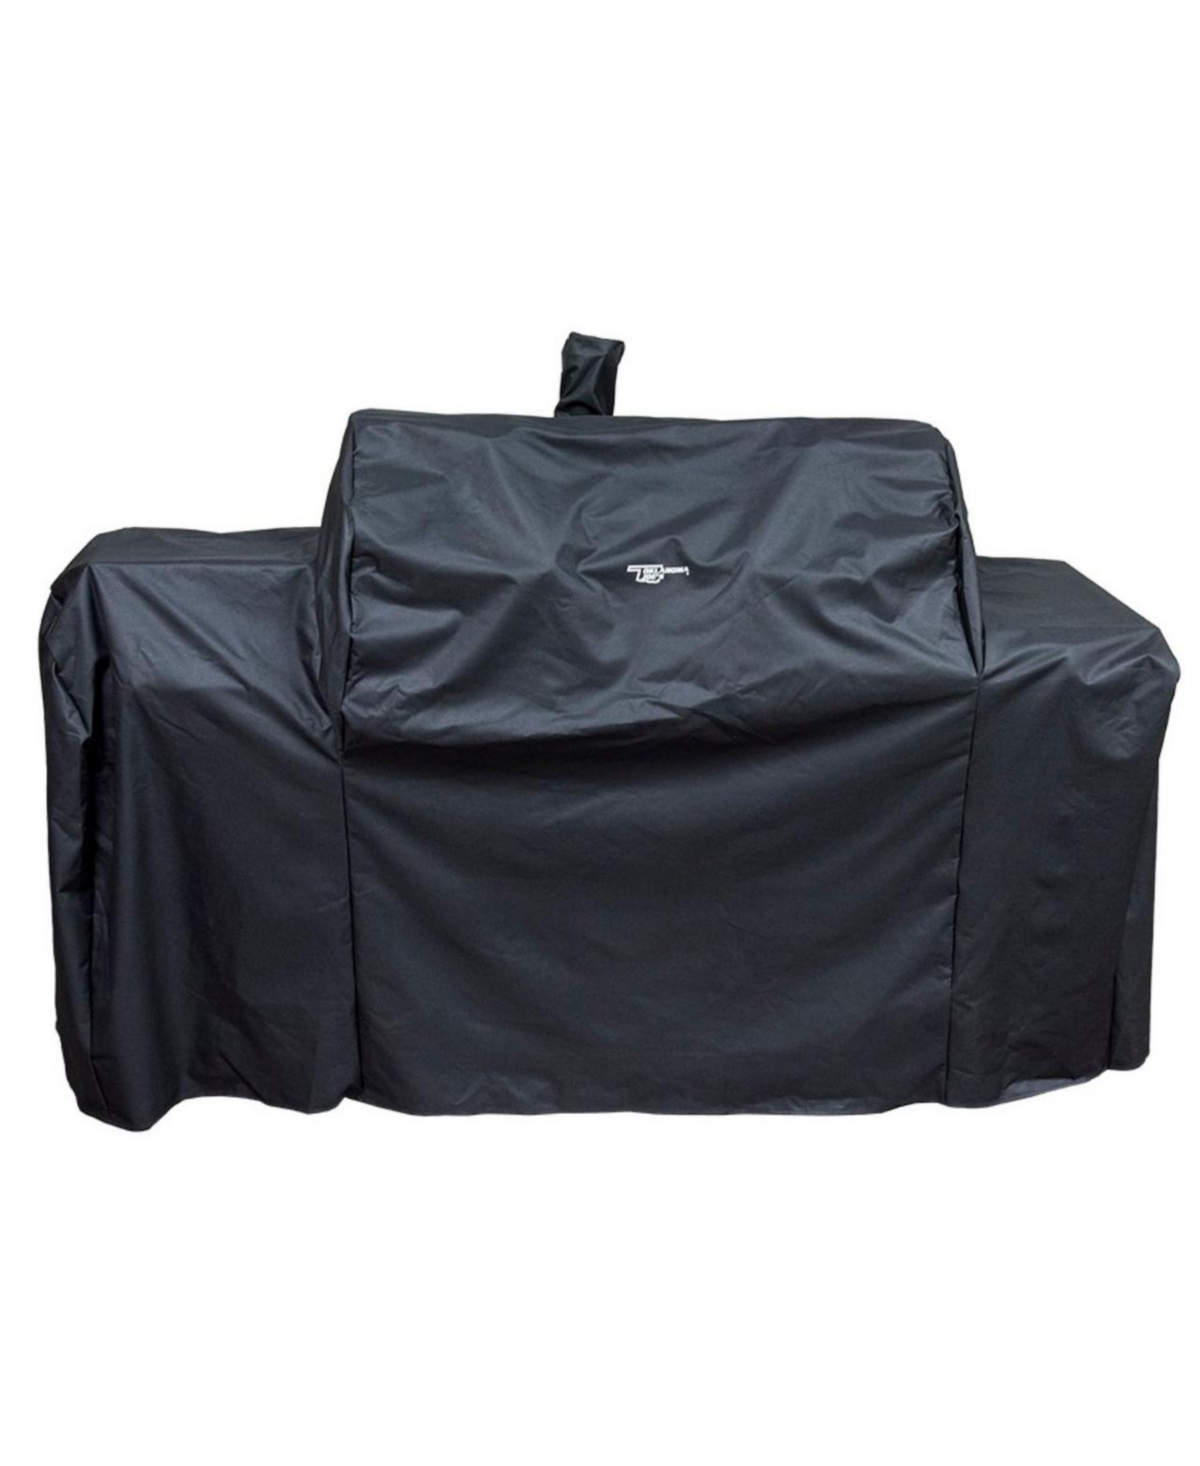 8694002 36.5 x 66.5 x 38 in. Black Grill Cover for Oklahoma Joes Longhorn Smoker - Black